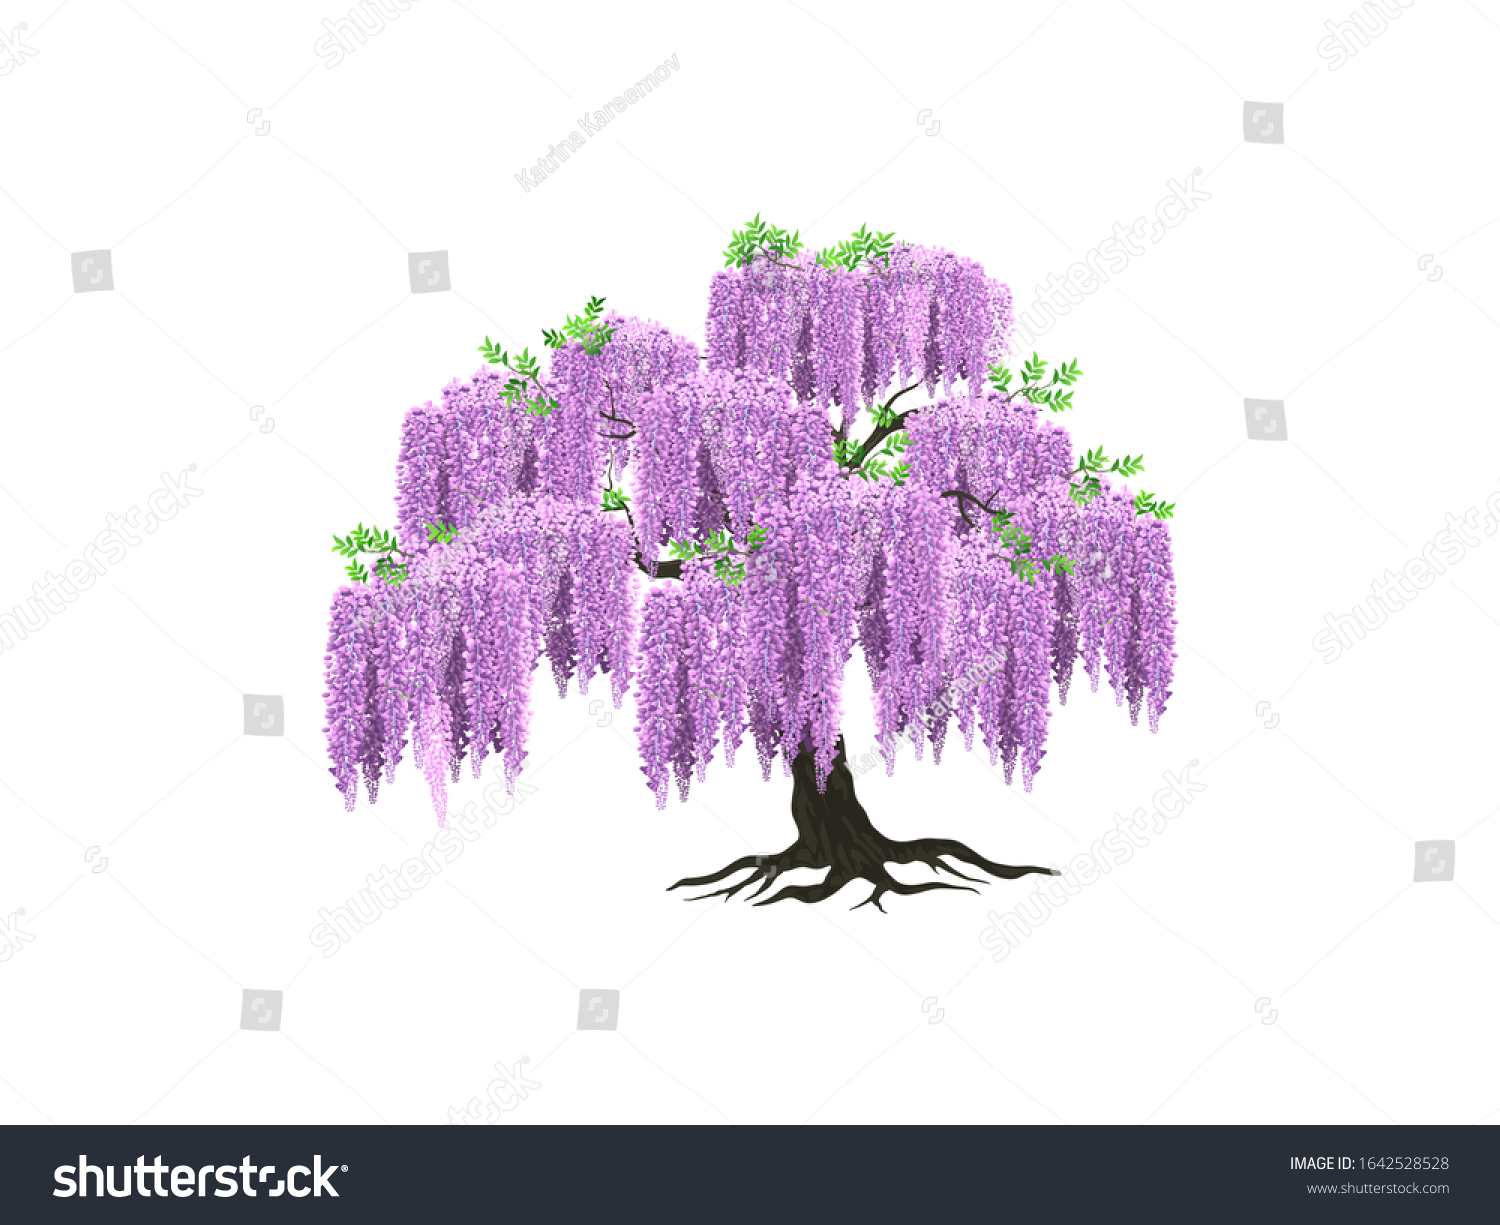 SVG of wisteria tree vector isolated on white svg